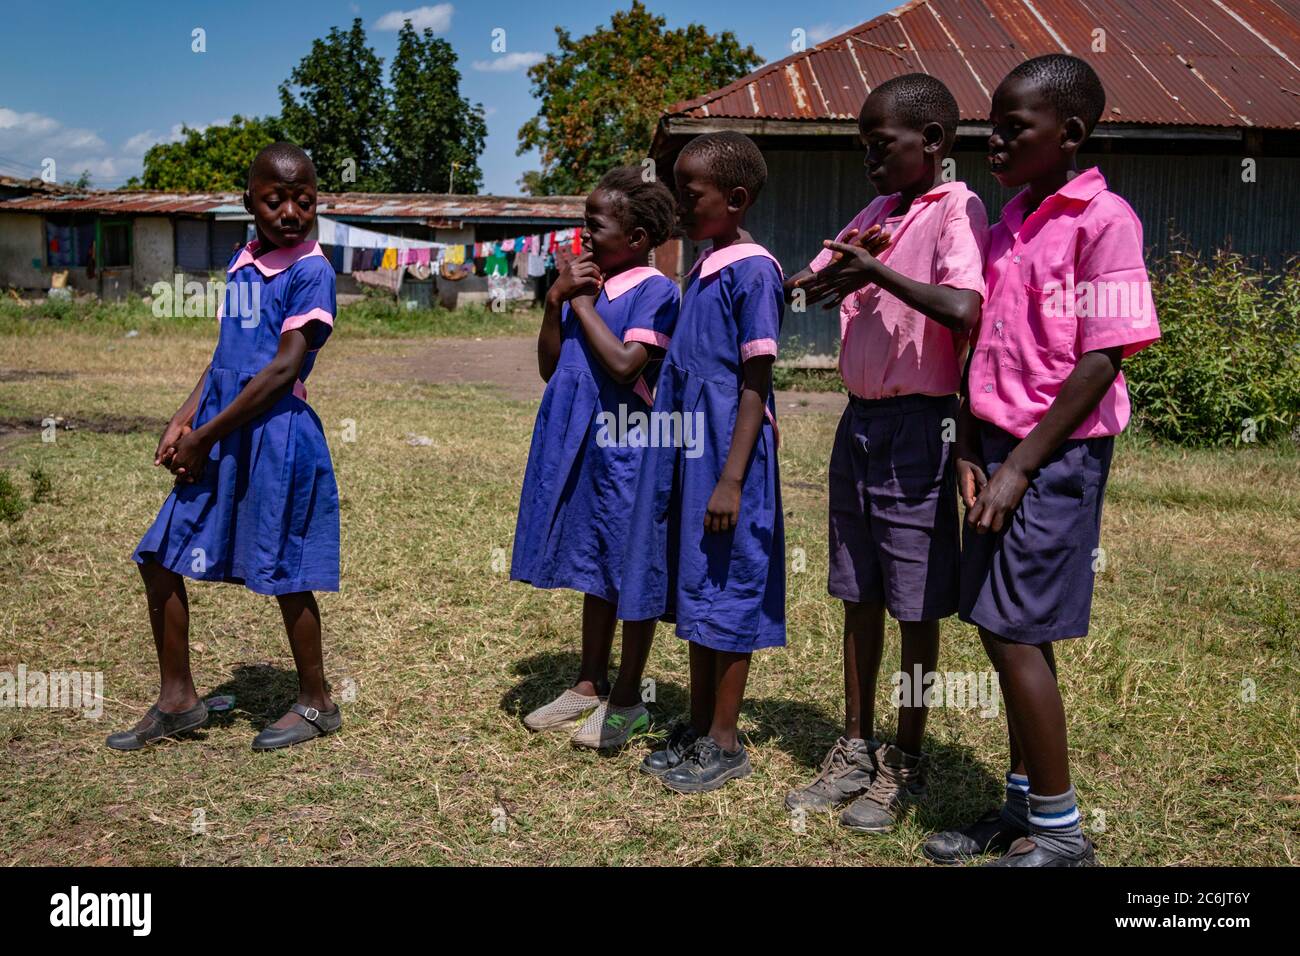 A young schoolgirl takes the lead and encourages her classmates to follow along in a presentation at her school in Ahero, Kenya Stock Photo